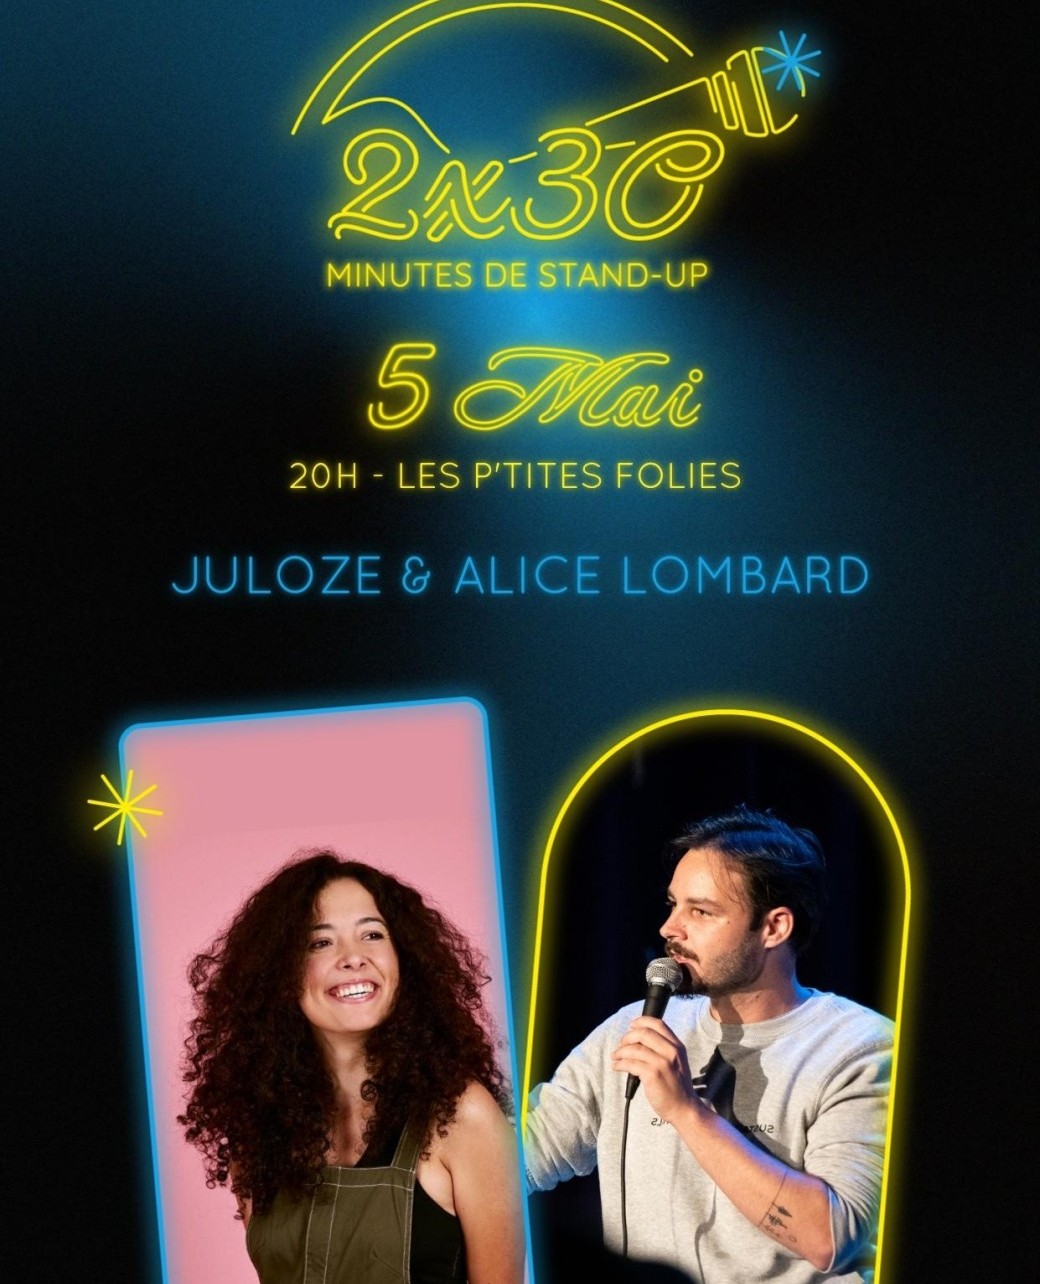 30 minutes chacun - Juloze & Alice Lombard